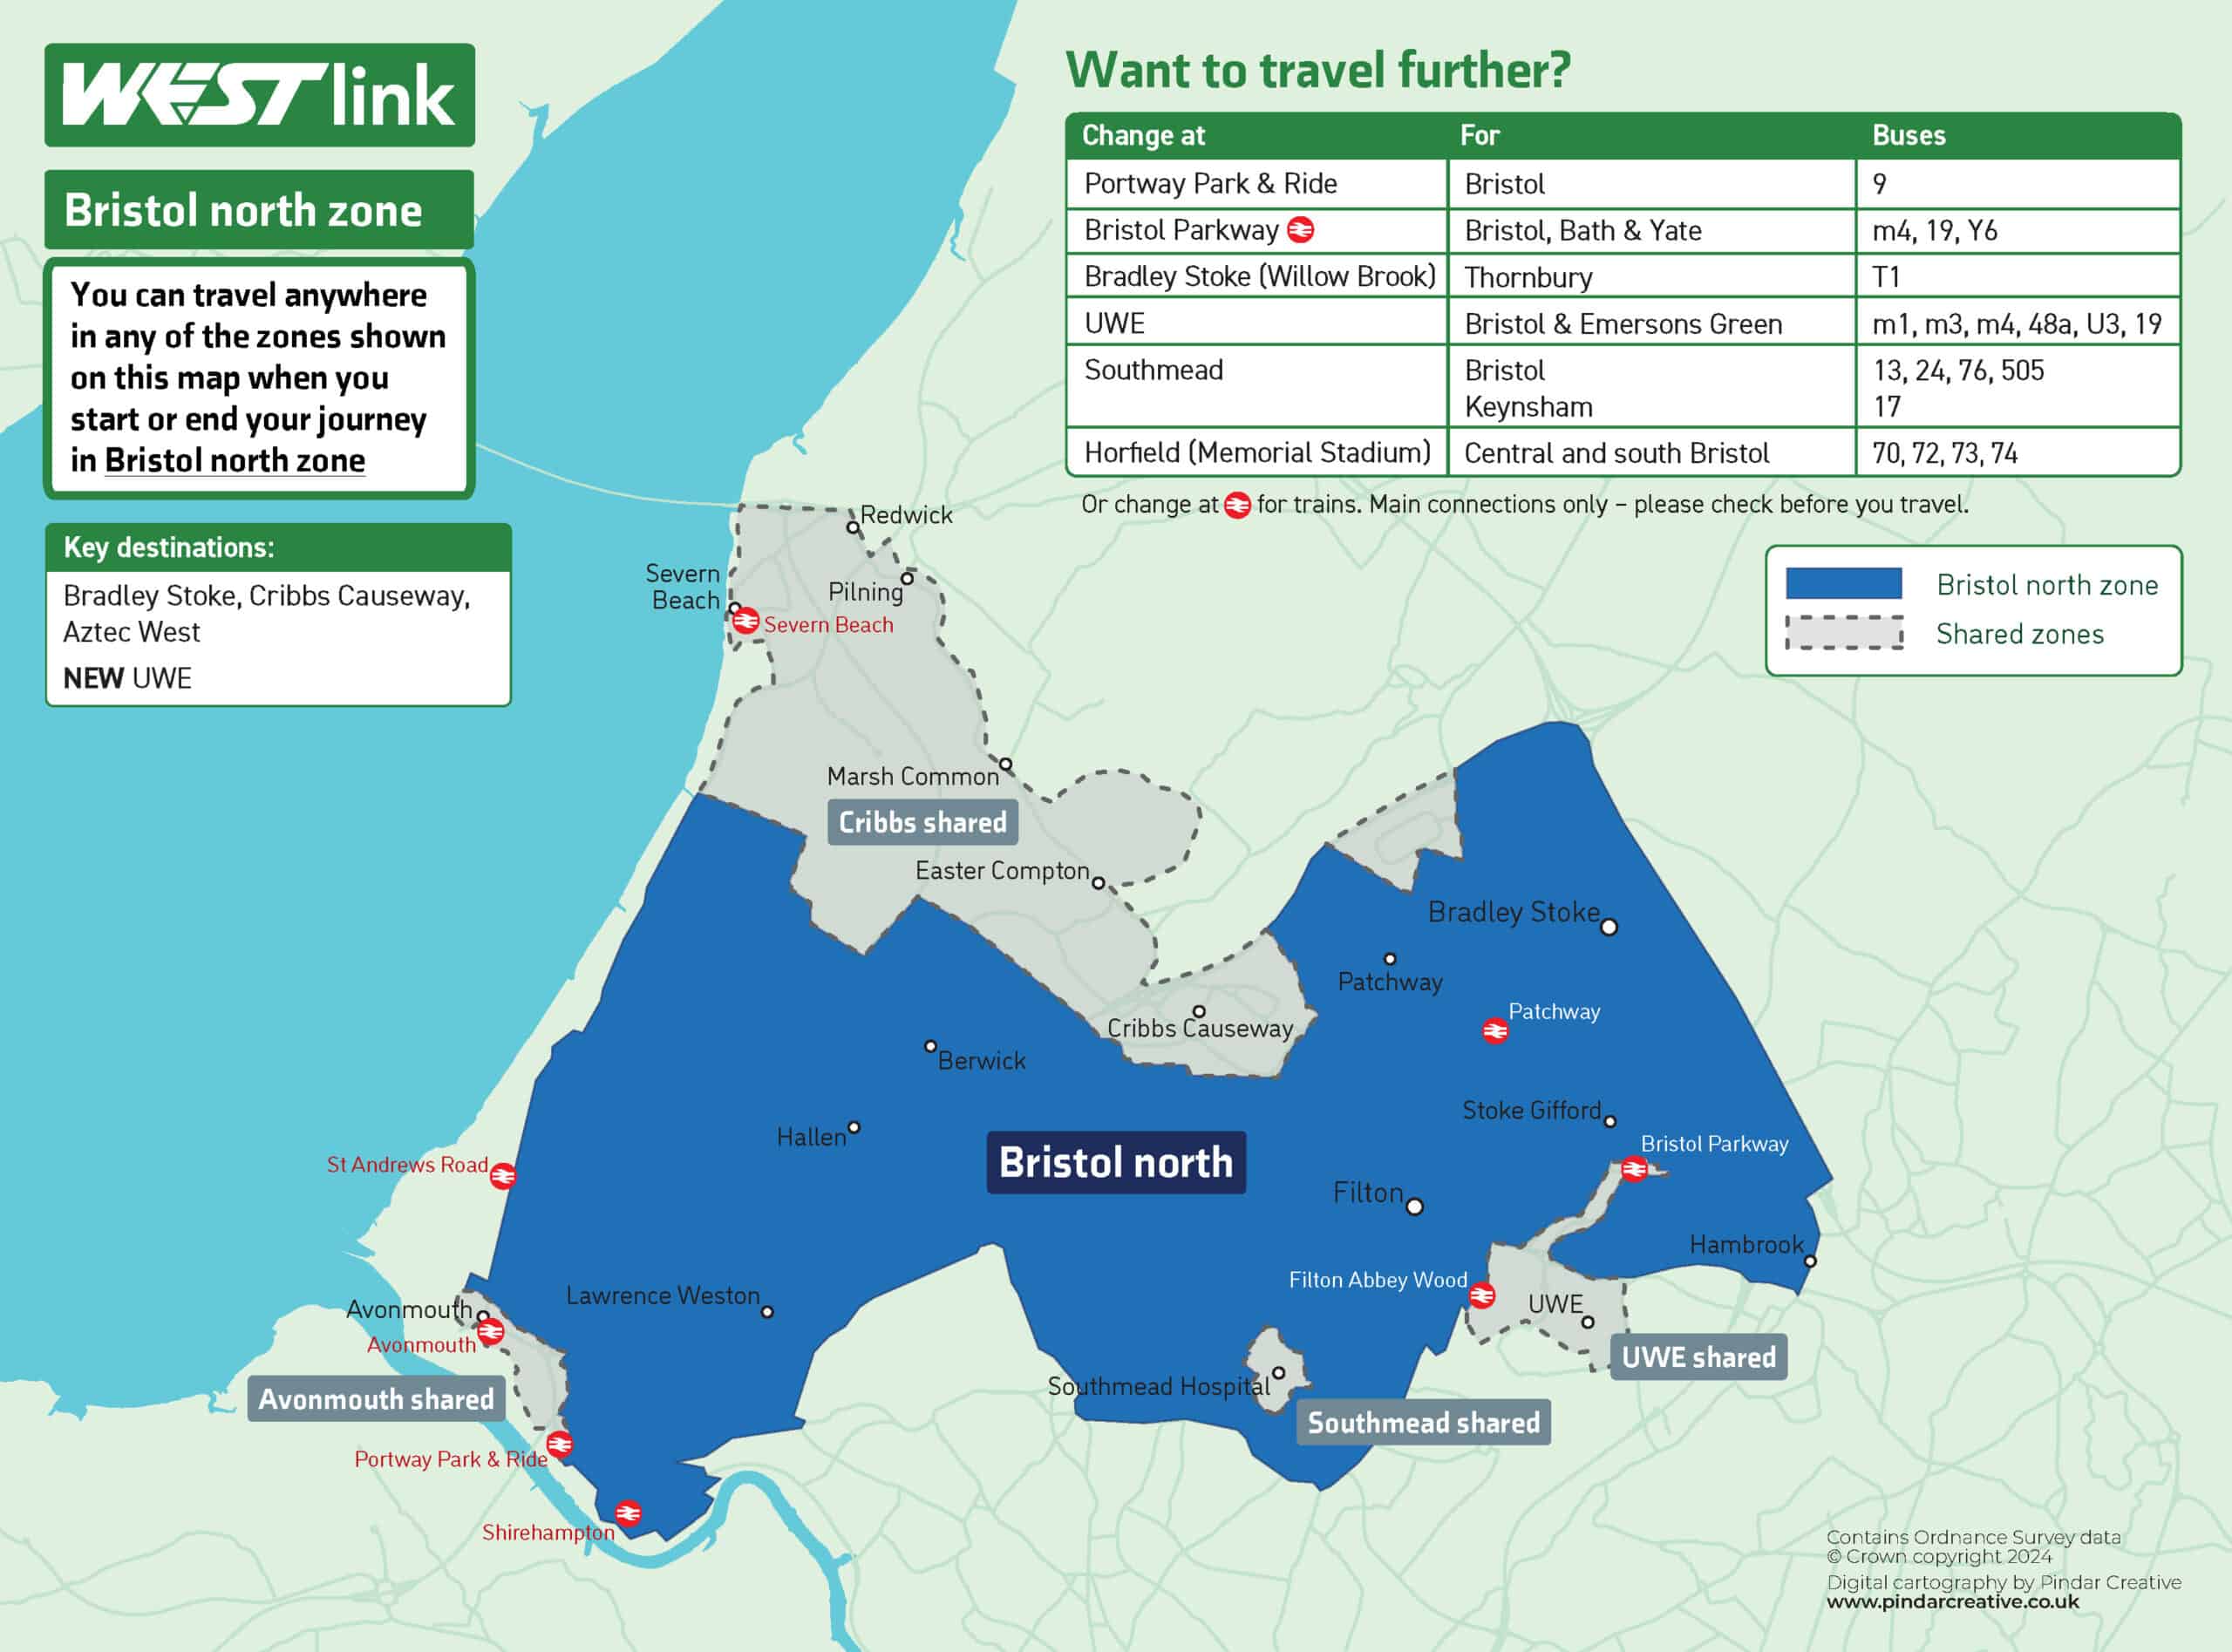 Bristol North zone map showing the boundaries and where you can travel. This information is also provided in an accessible version below.